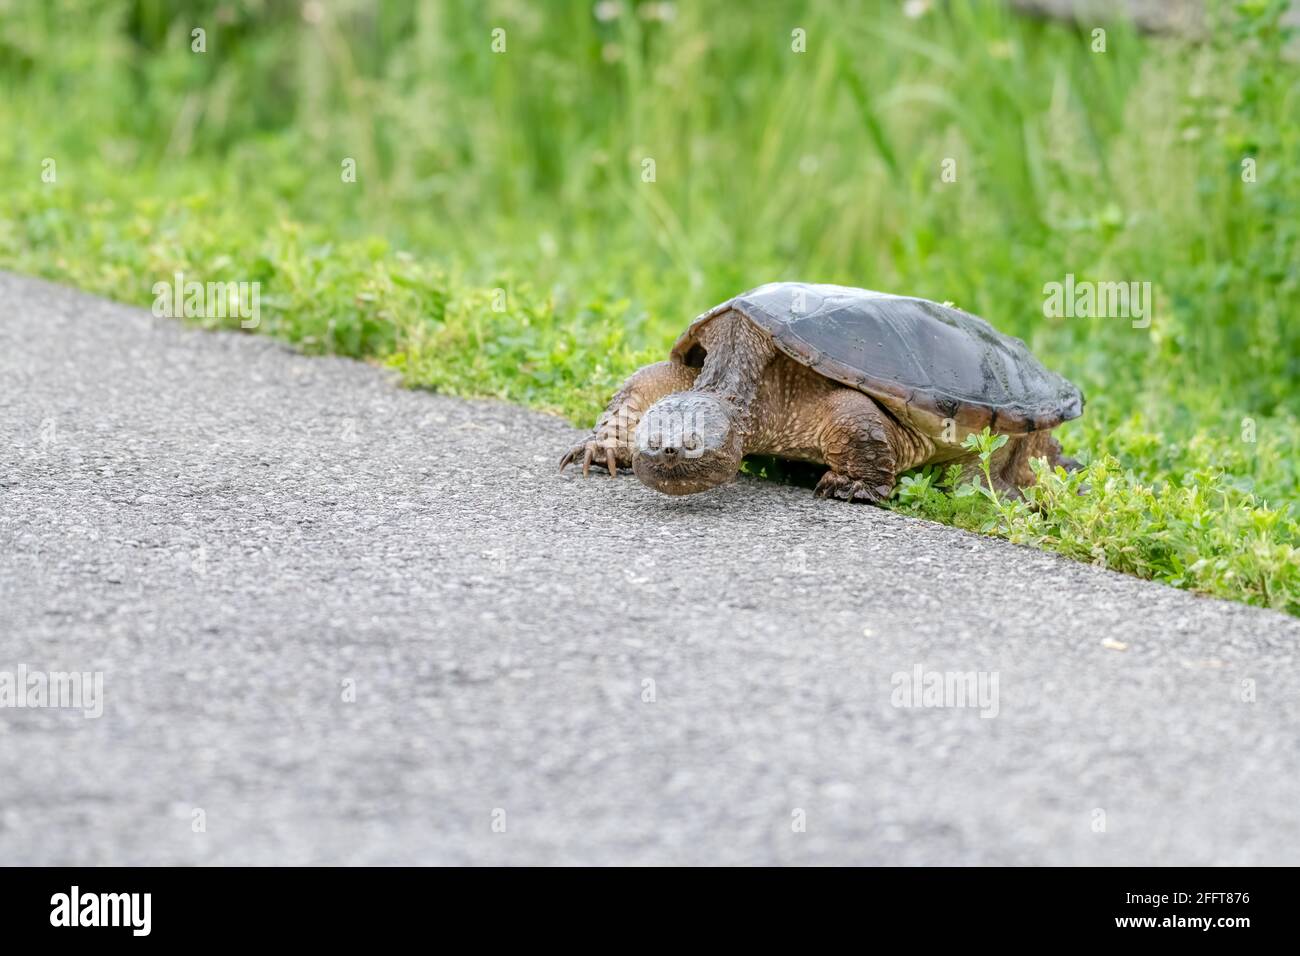 Snapping turtle crossing a path in summer Stock Photo